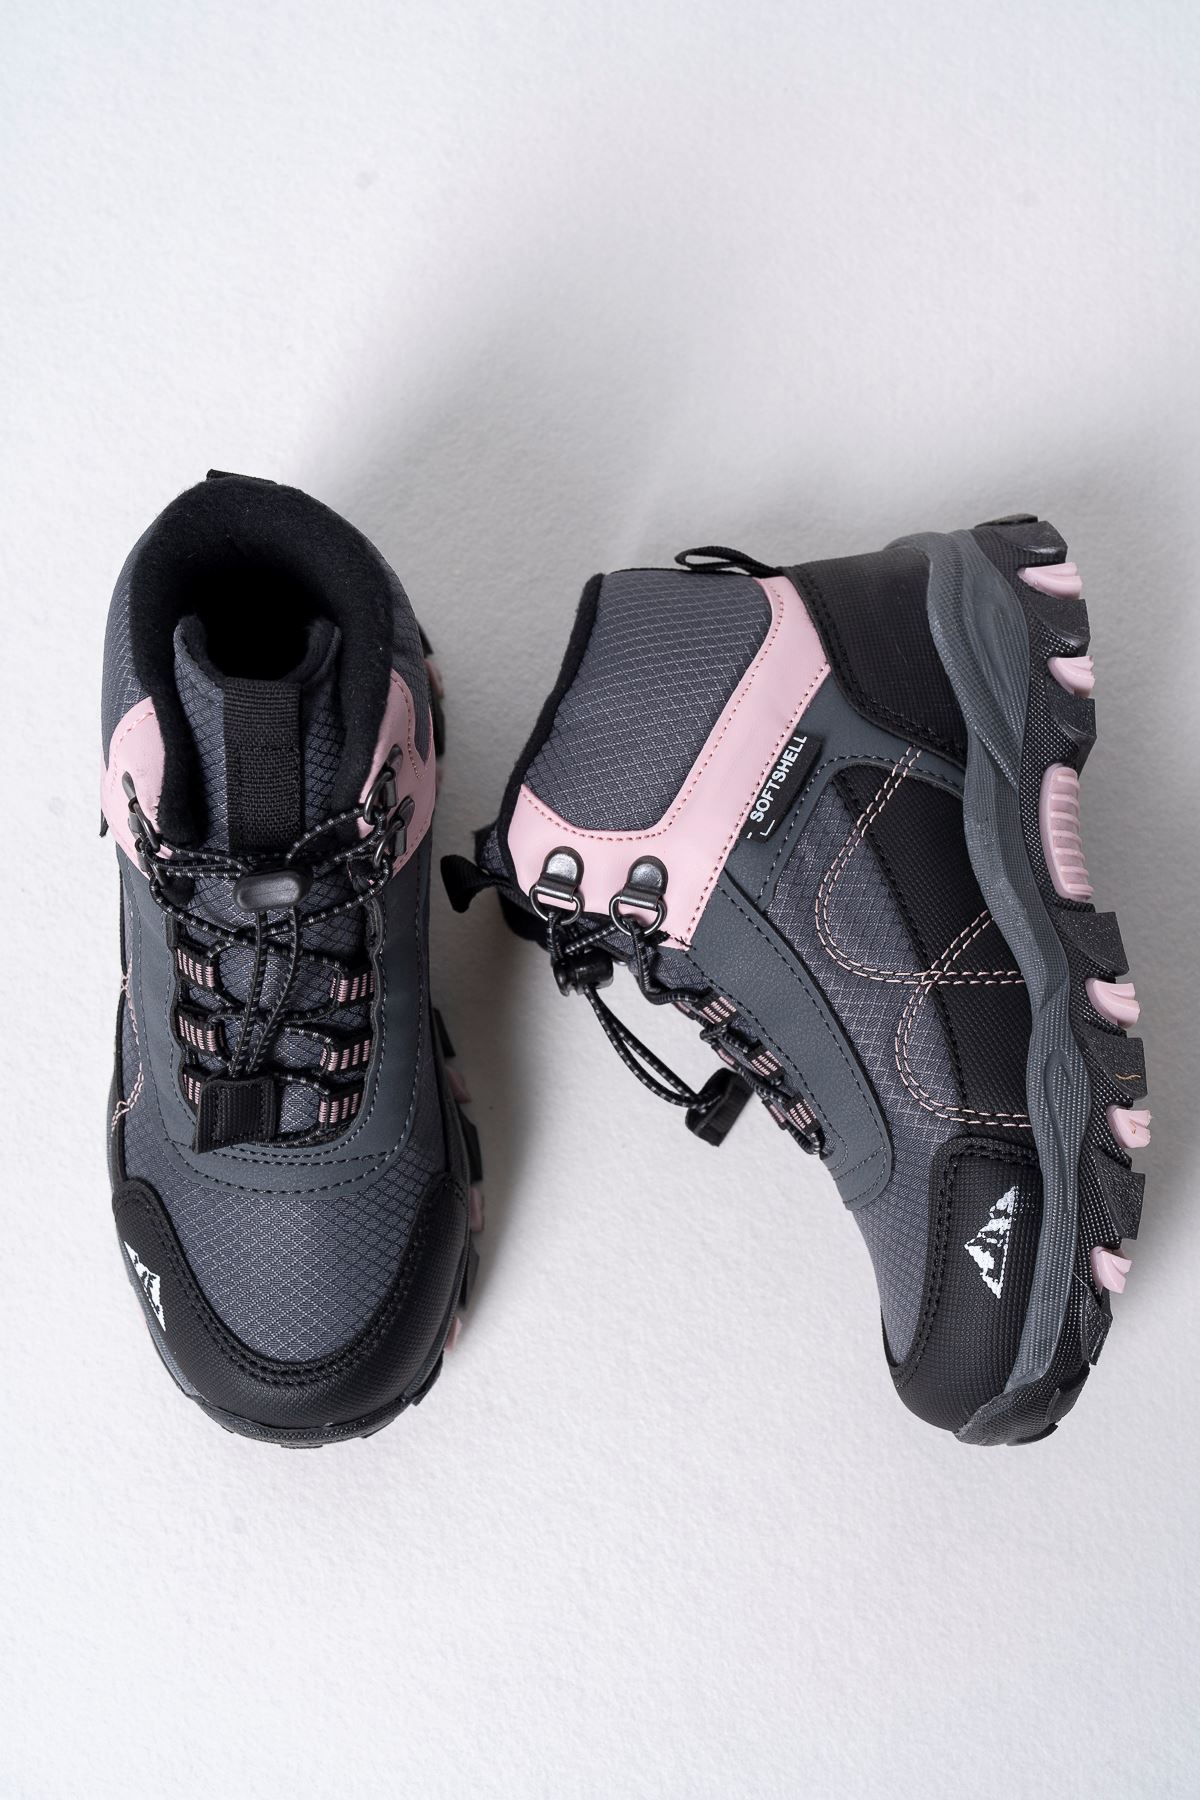 Children's Tracking Boots with Elastic Laces and Pink Garnish